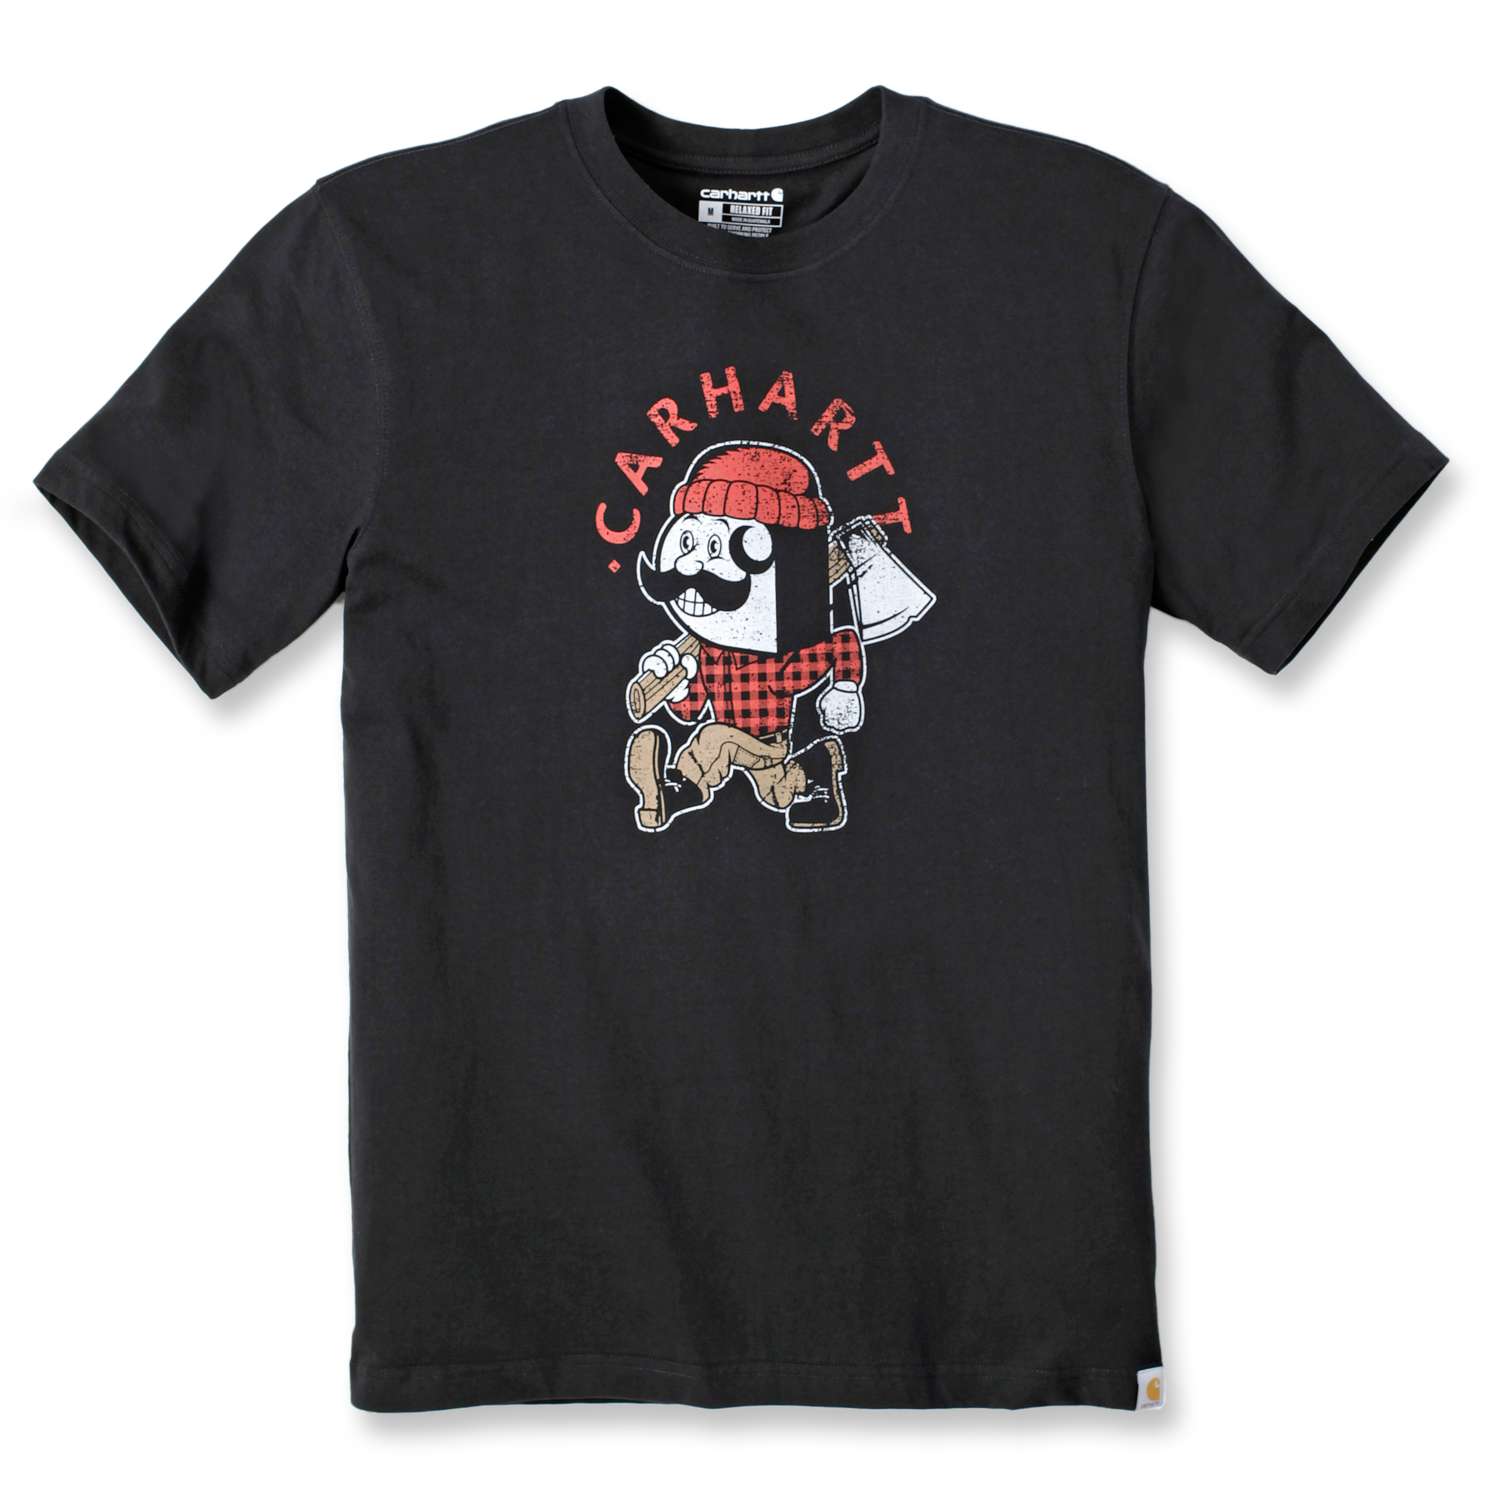 Short-sleeved T-shirt with lumberjack graphic